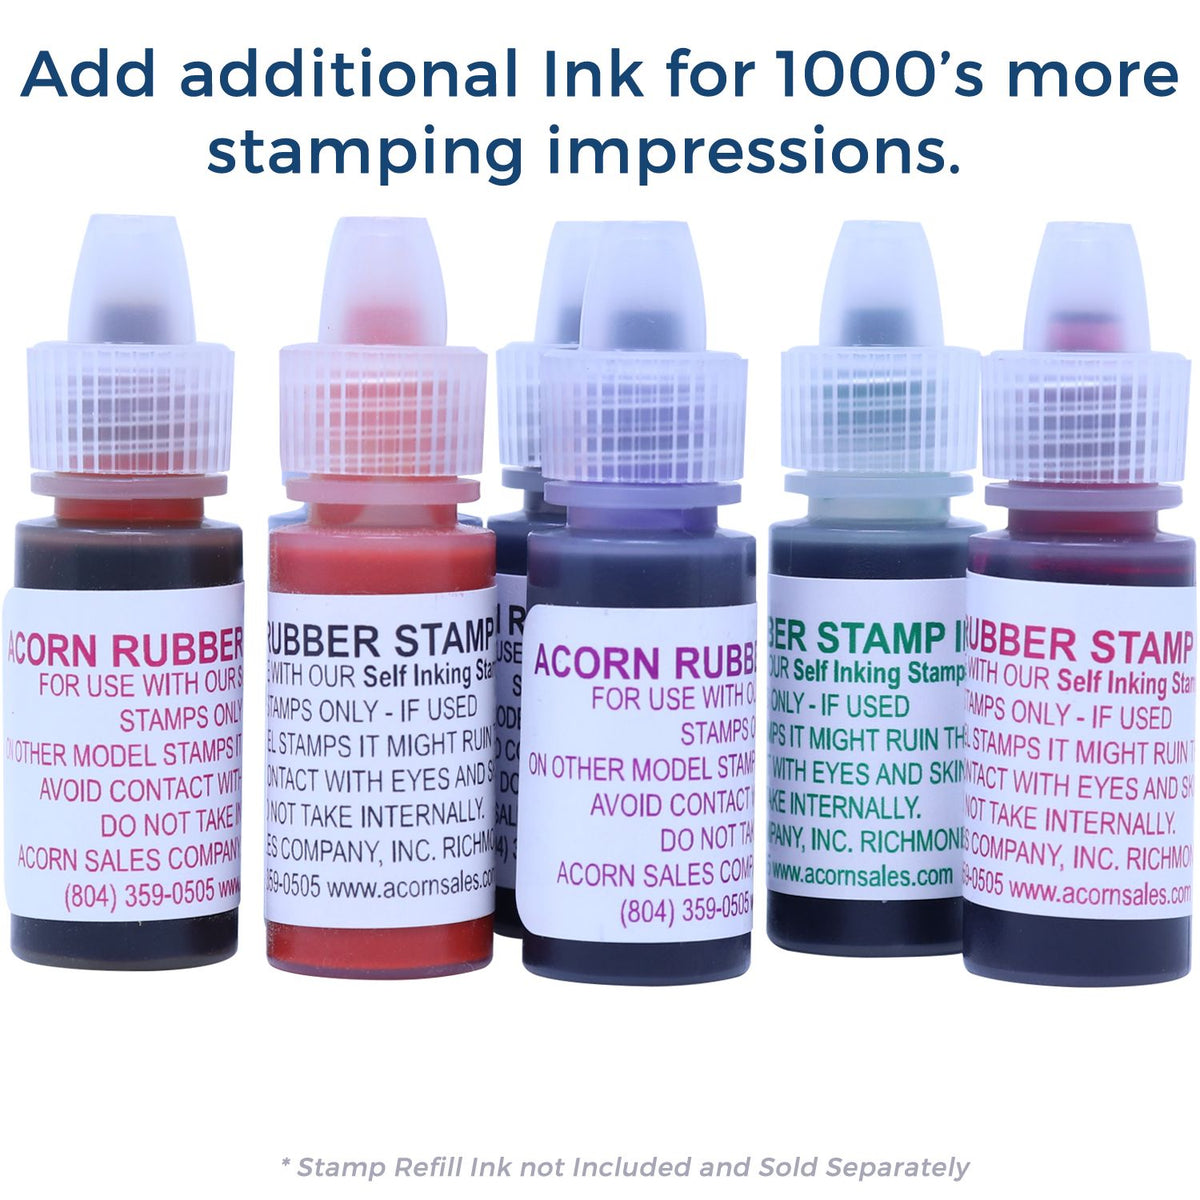 Refill Ink for Self-Inking Round Initial Stamp Available